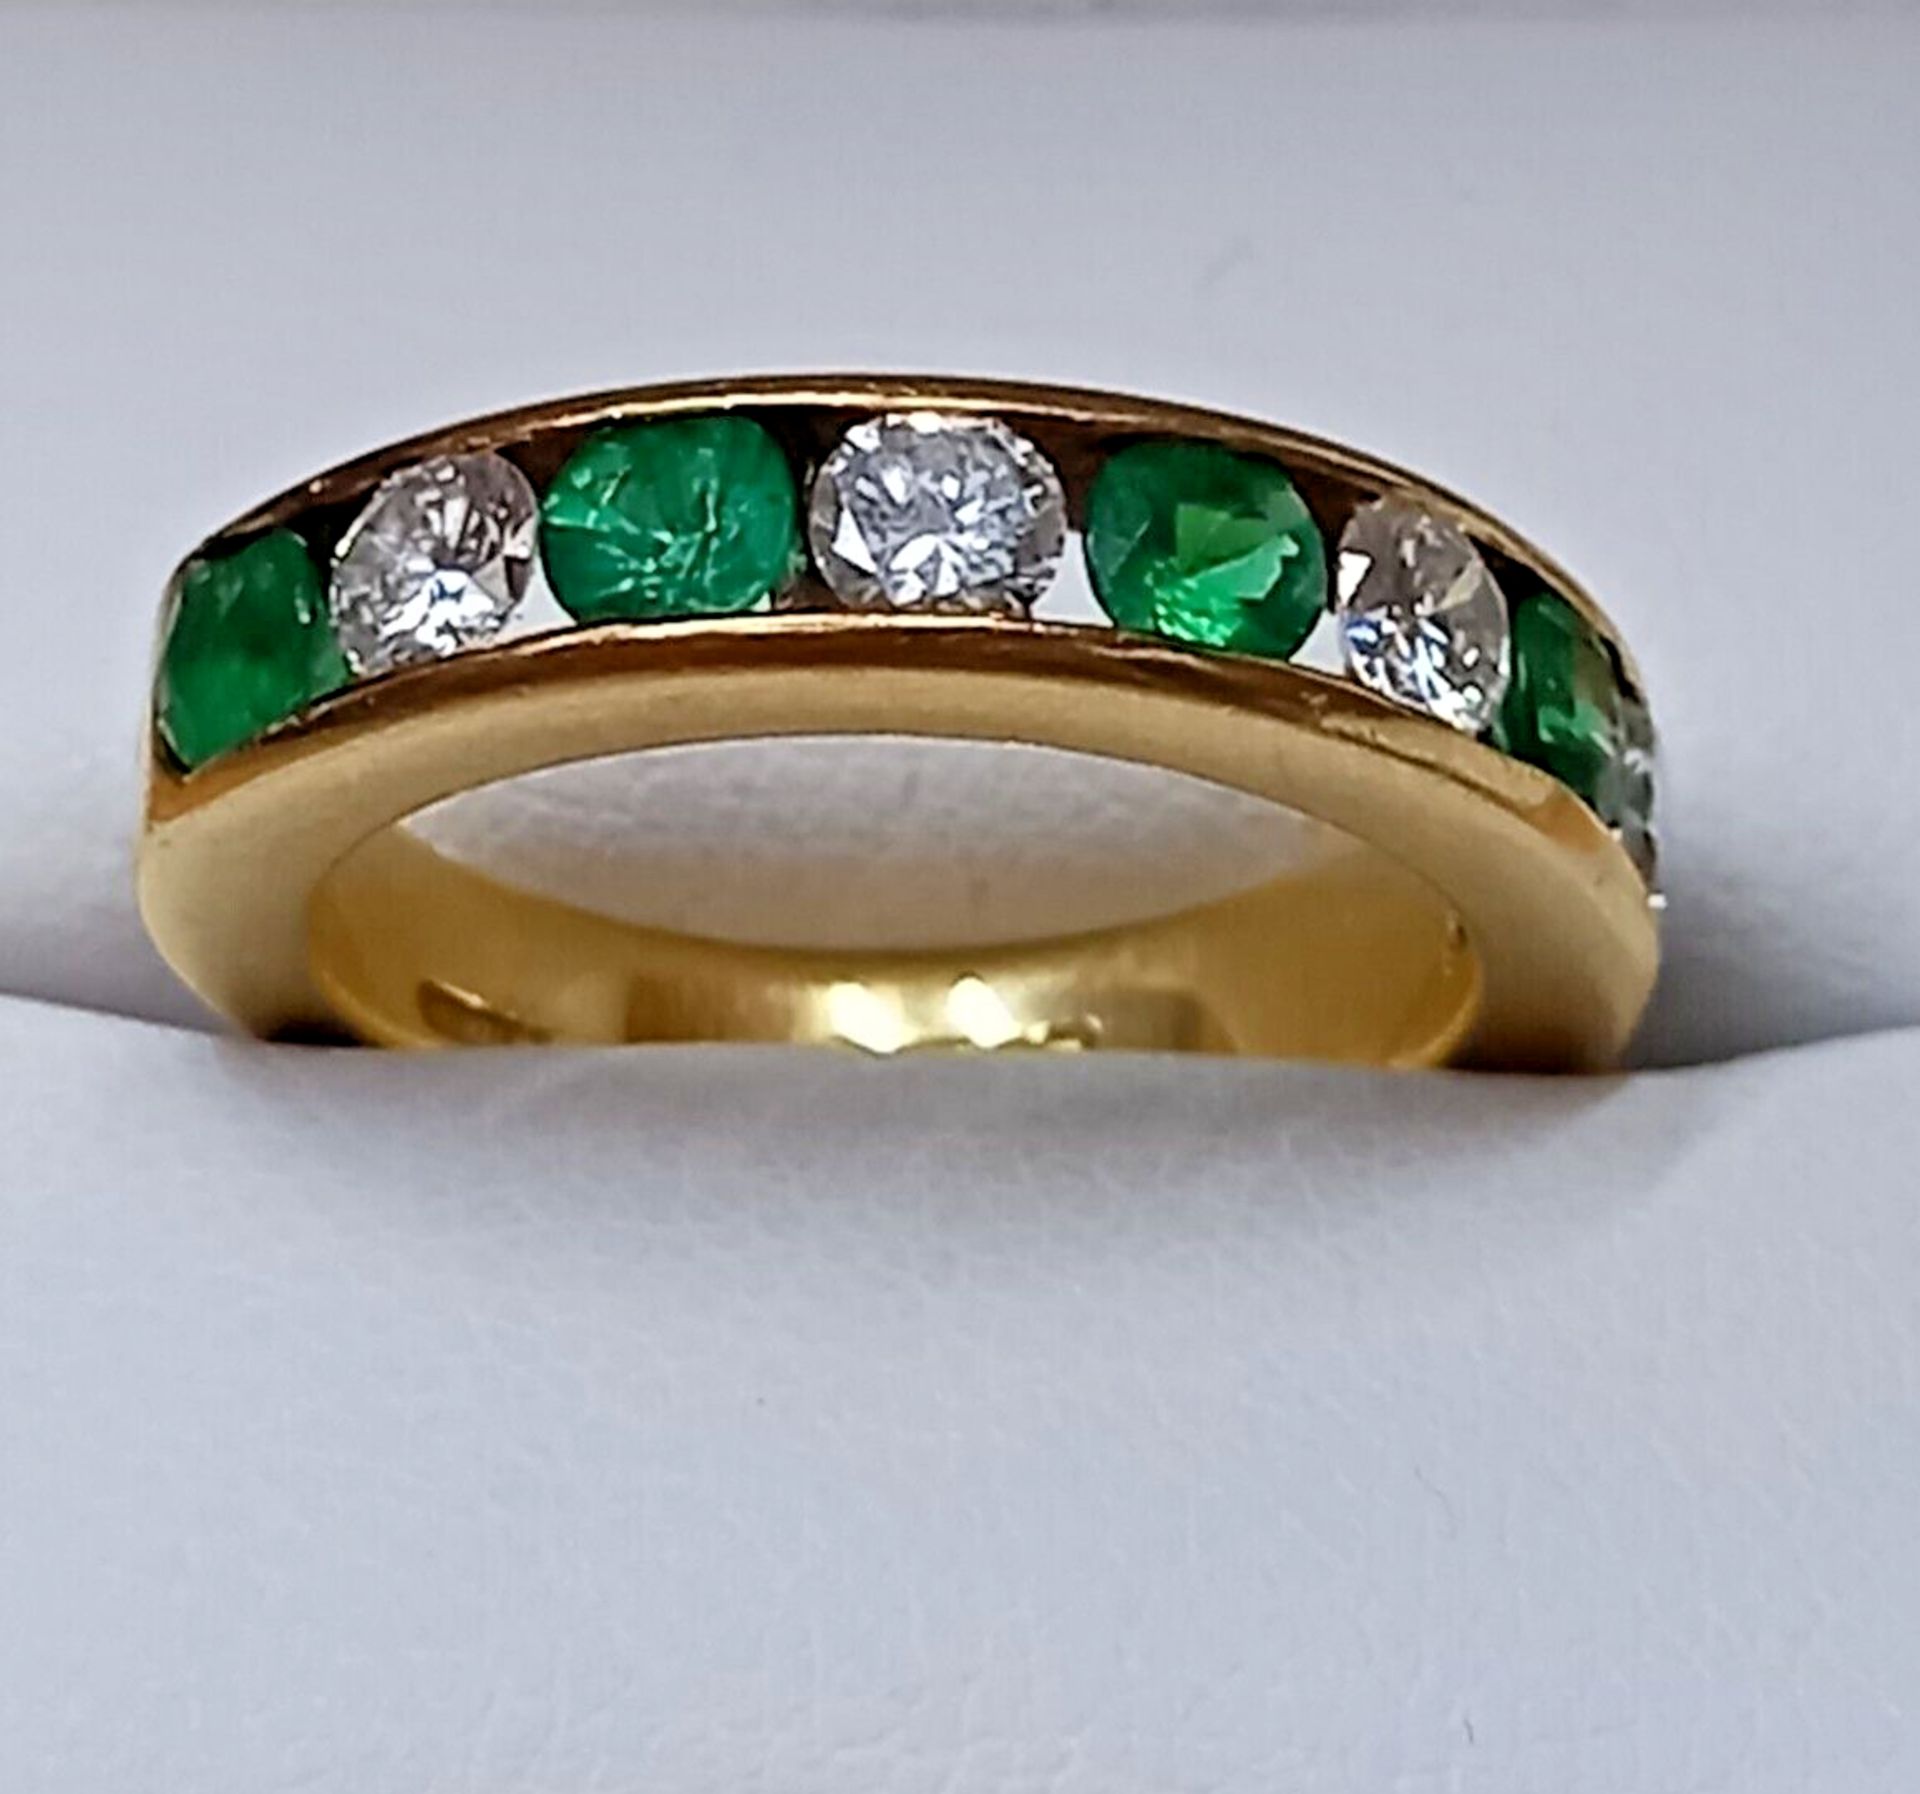 EMERALD & DIAMOND RING/18CT YELLOW GOLD + GIFT BOX + VALUATION CERTIFICATE OF £3400 - Image 2 of 3